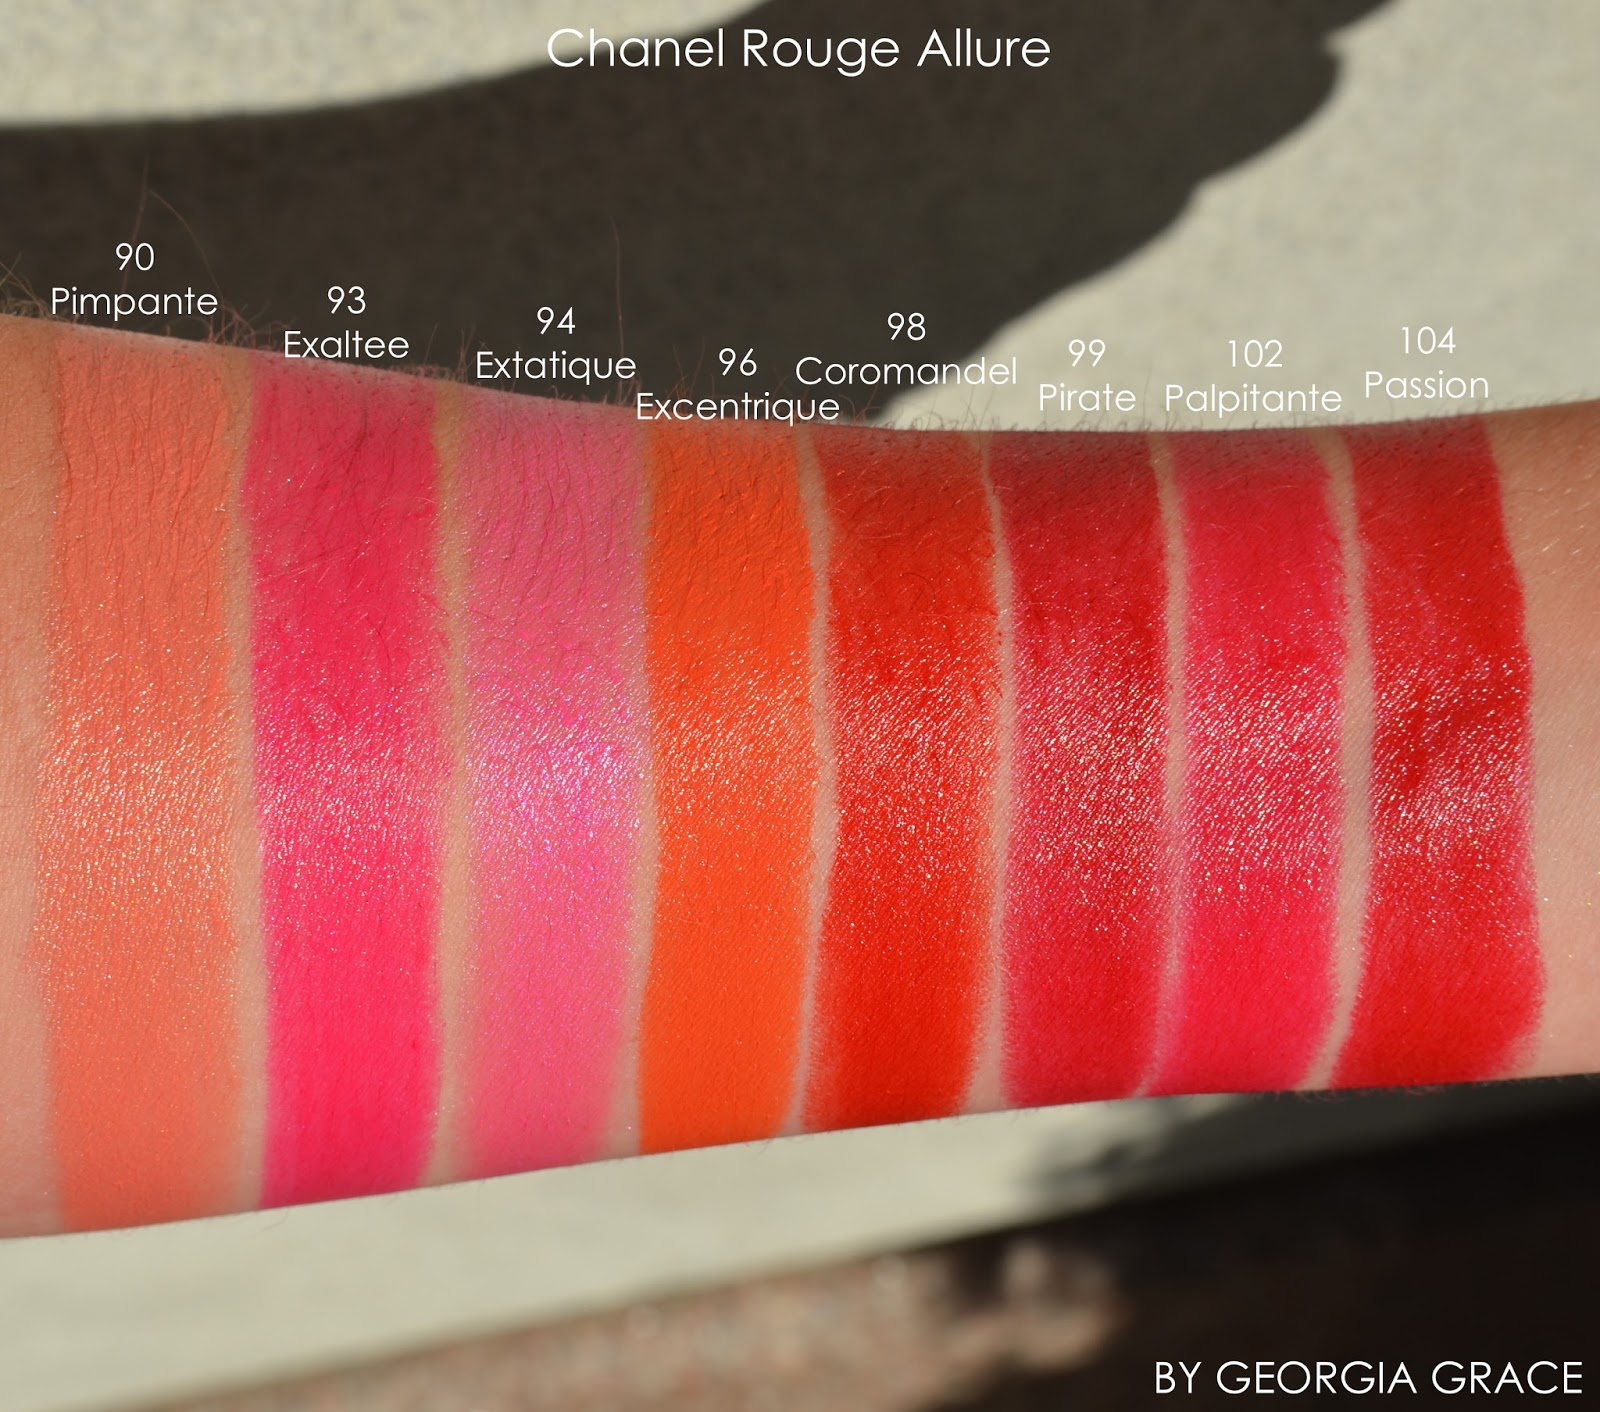 Chanel Rouge Allure Swatches Of All Shades By Georgia Grace